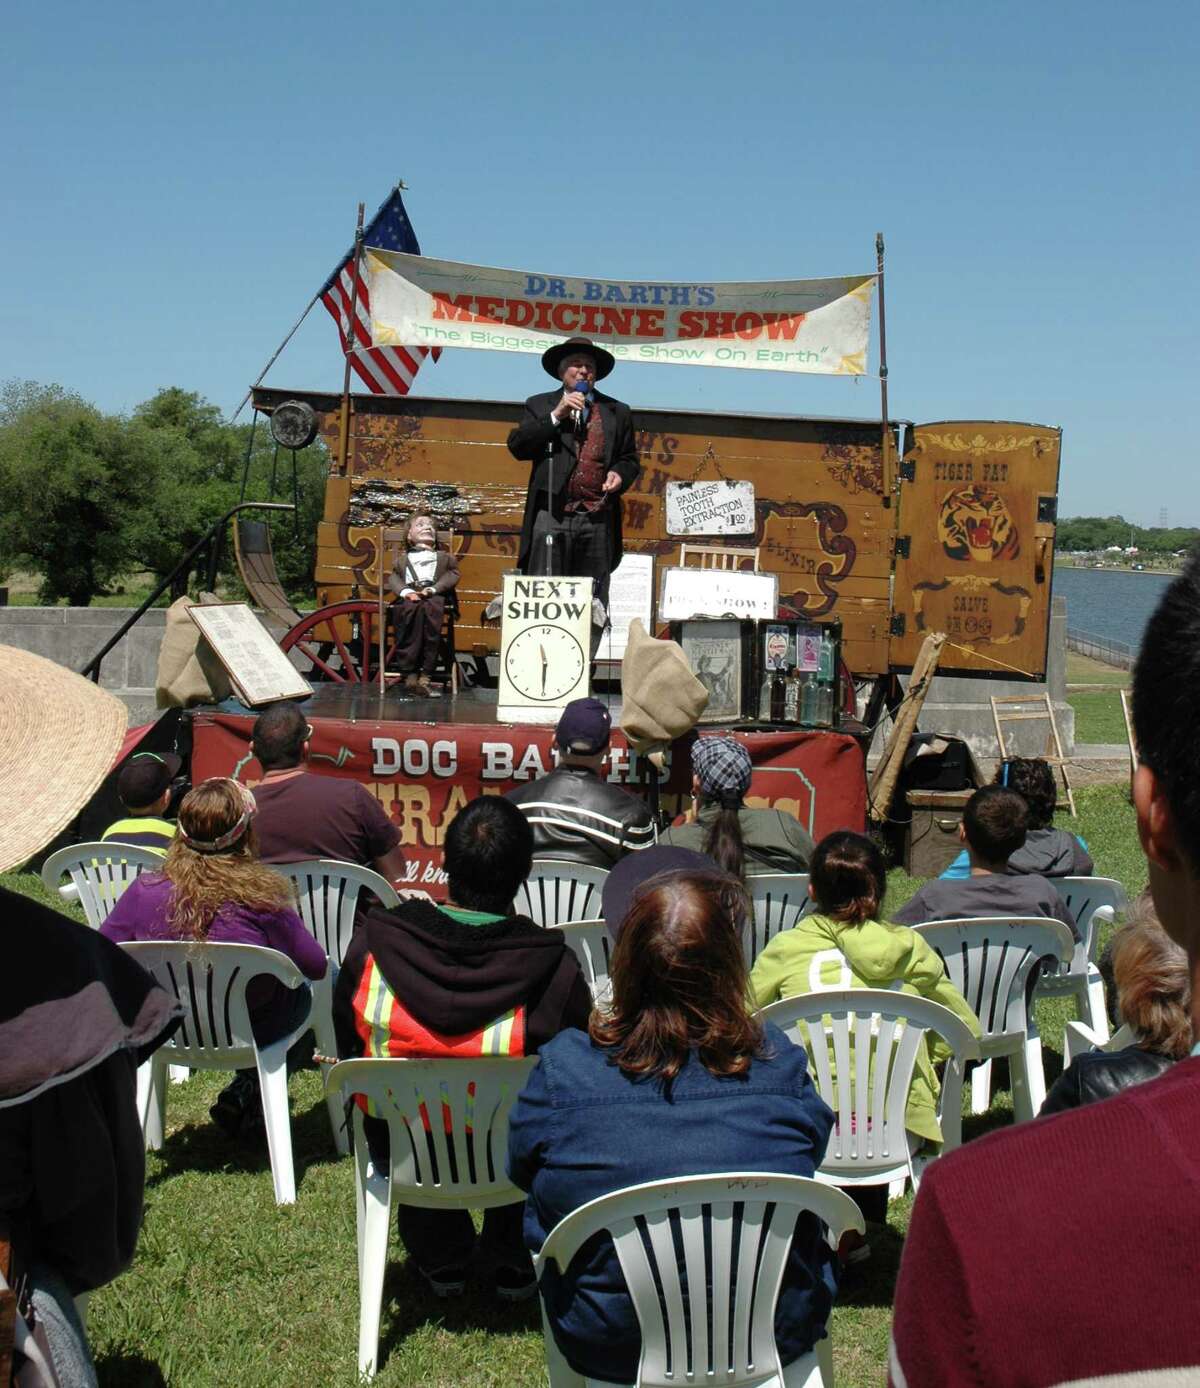 Dr. Barth's Medicine Show on the grounds of the San Jacinto Day Festival.